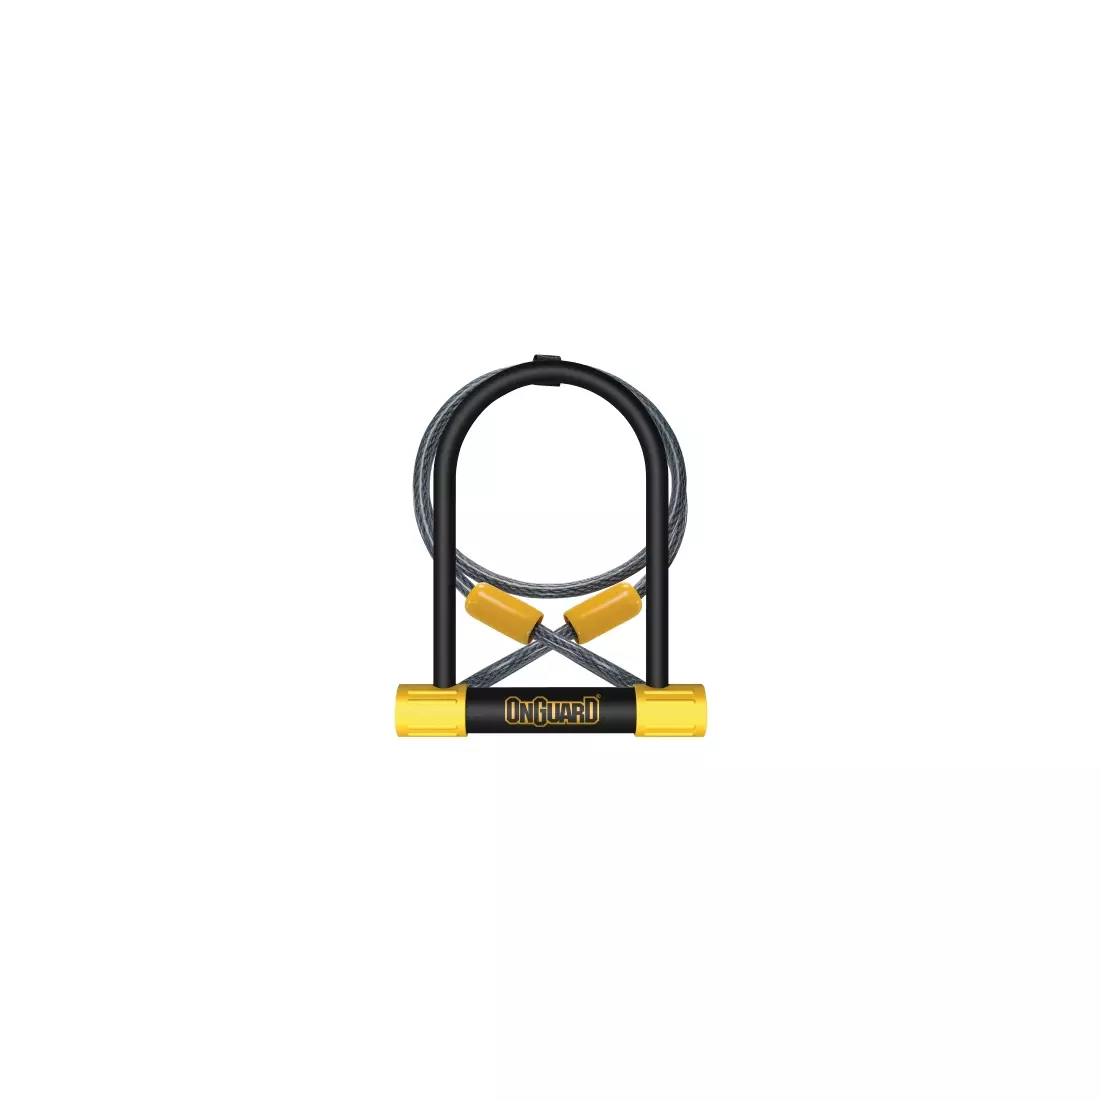 ONGUARD Bicycle clasp Bulldog DT 8012 U-LOCK - 13mm 115mm 230mm - 5 x Keys with code + rope 10mm x 120cm ONG-8012